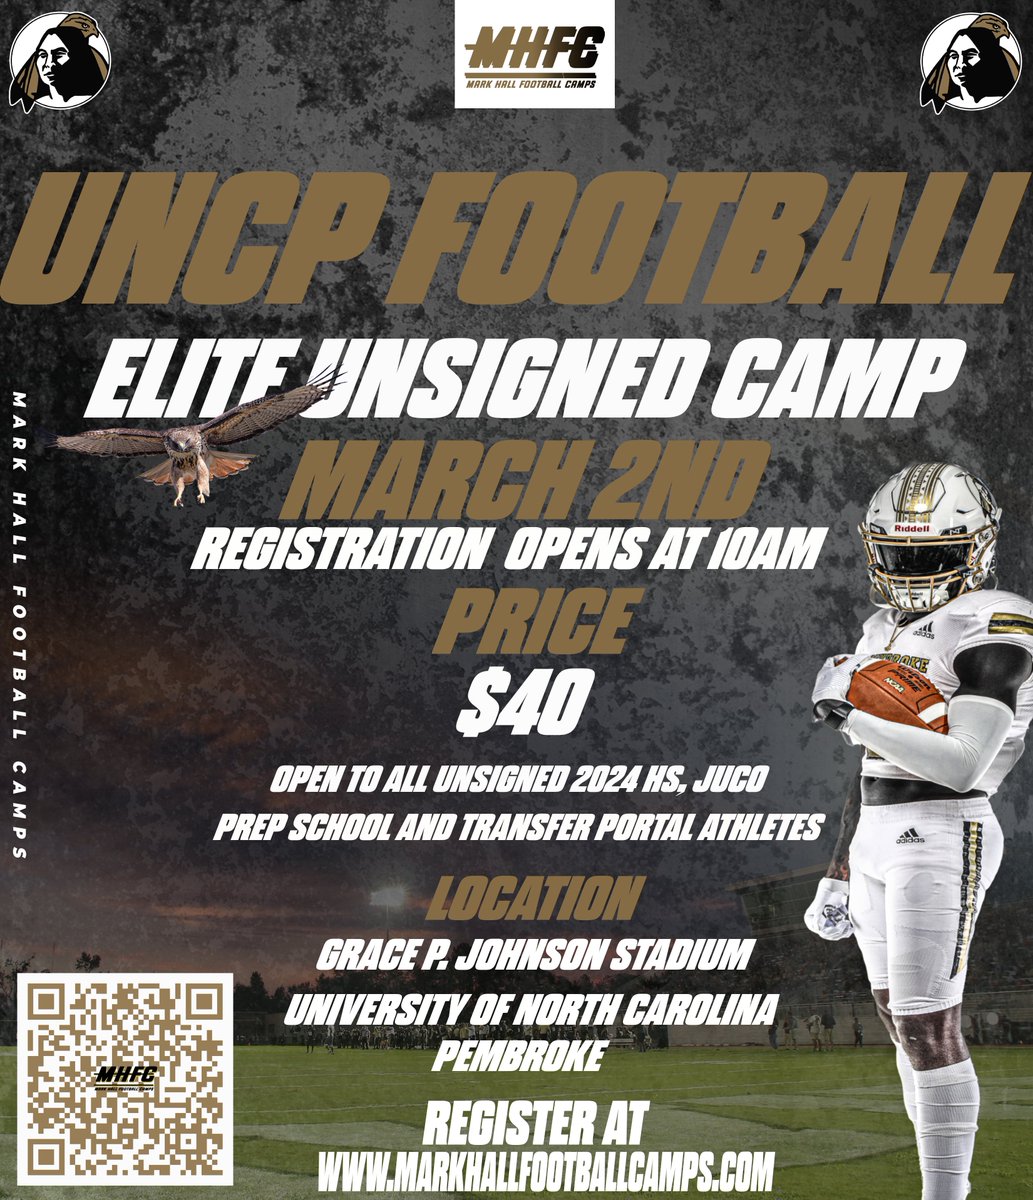 Still looking for an opportunity? Don't Miss out on our Unsigned Prospect Camp here at UNCP! 📆Saturday March 2nd ⌚️10 am 🏟️Grace P. Johnson Stadium (UNC Pembroke) Register Today: markhallfootballcamps.com/event-details-…